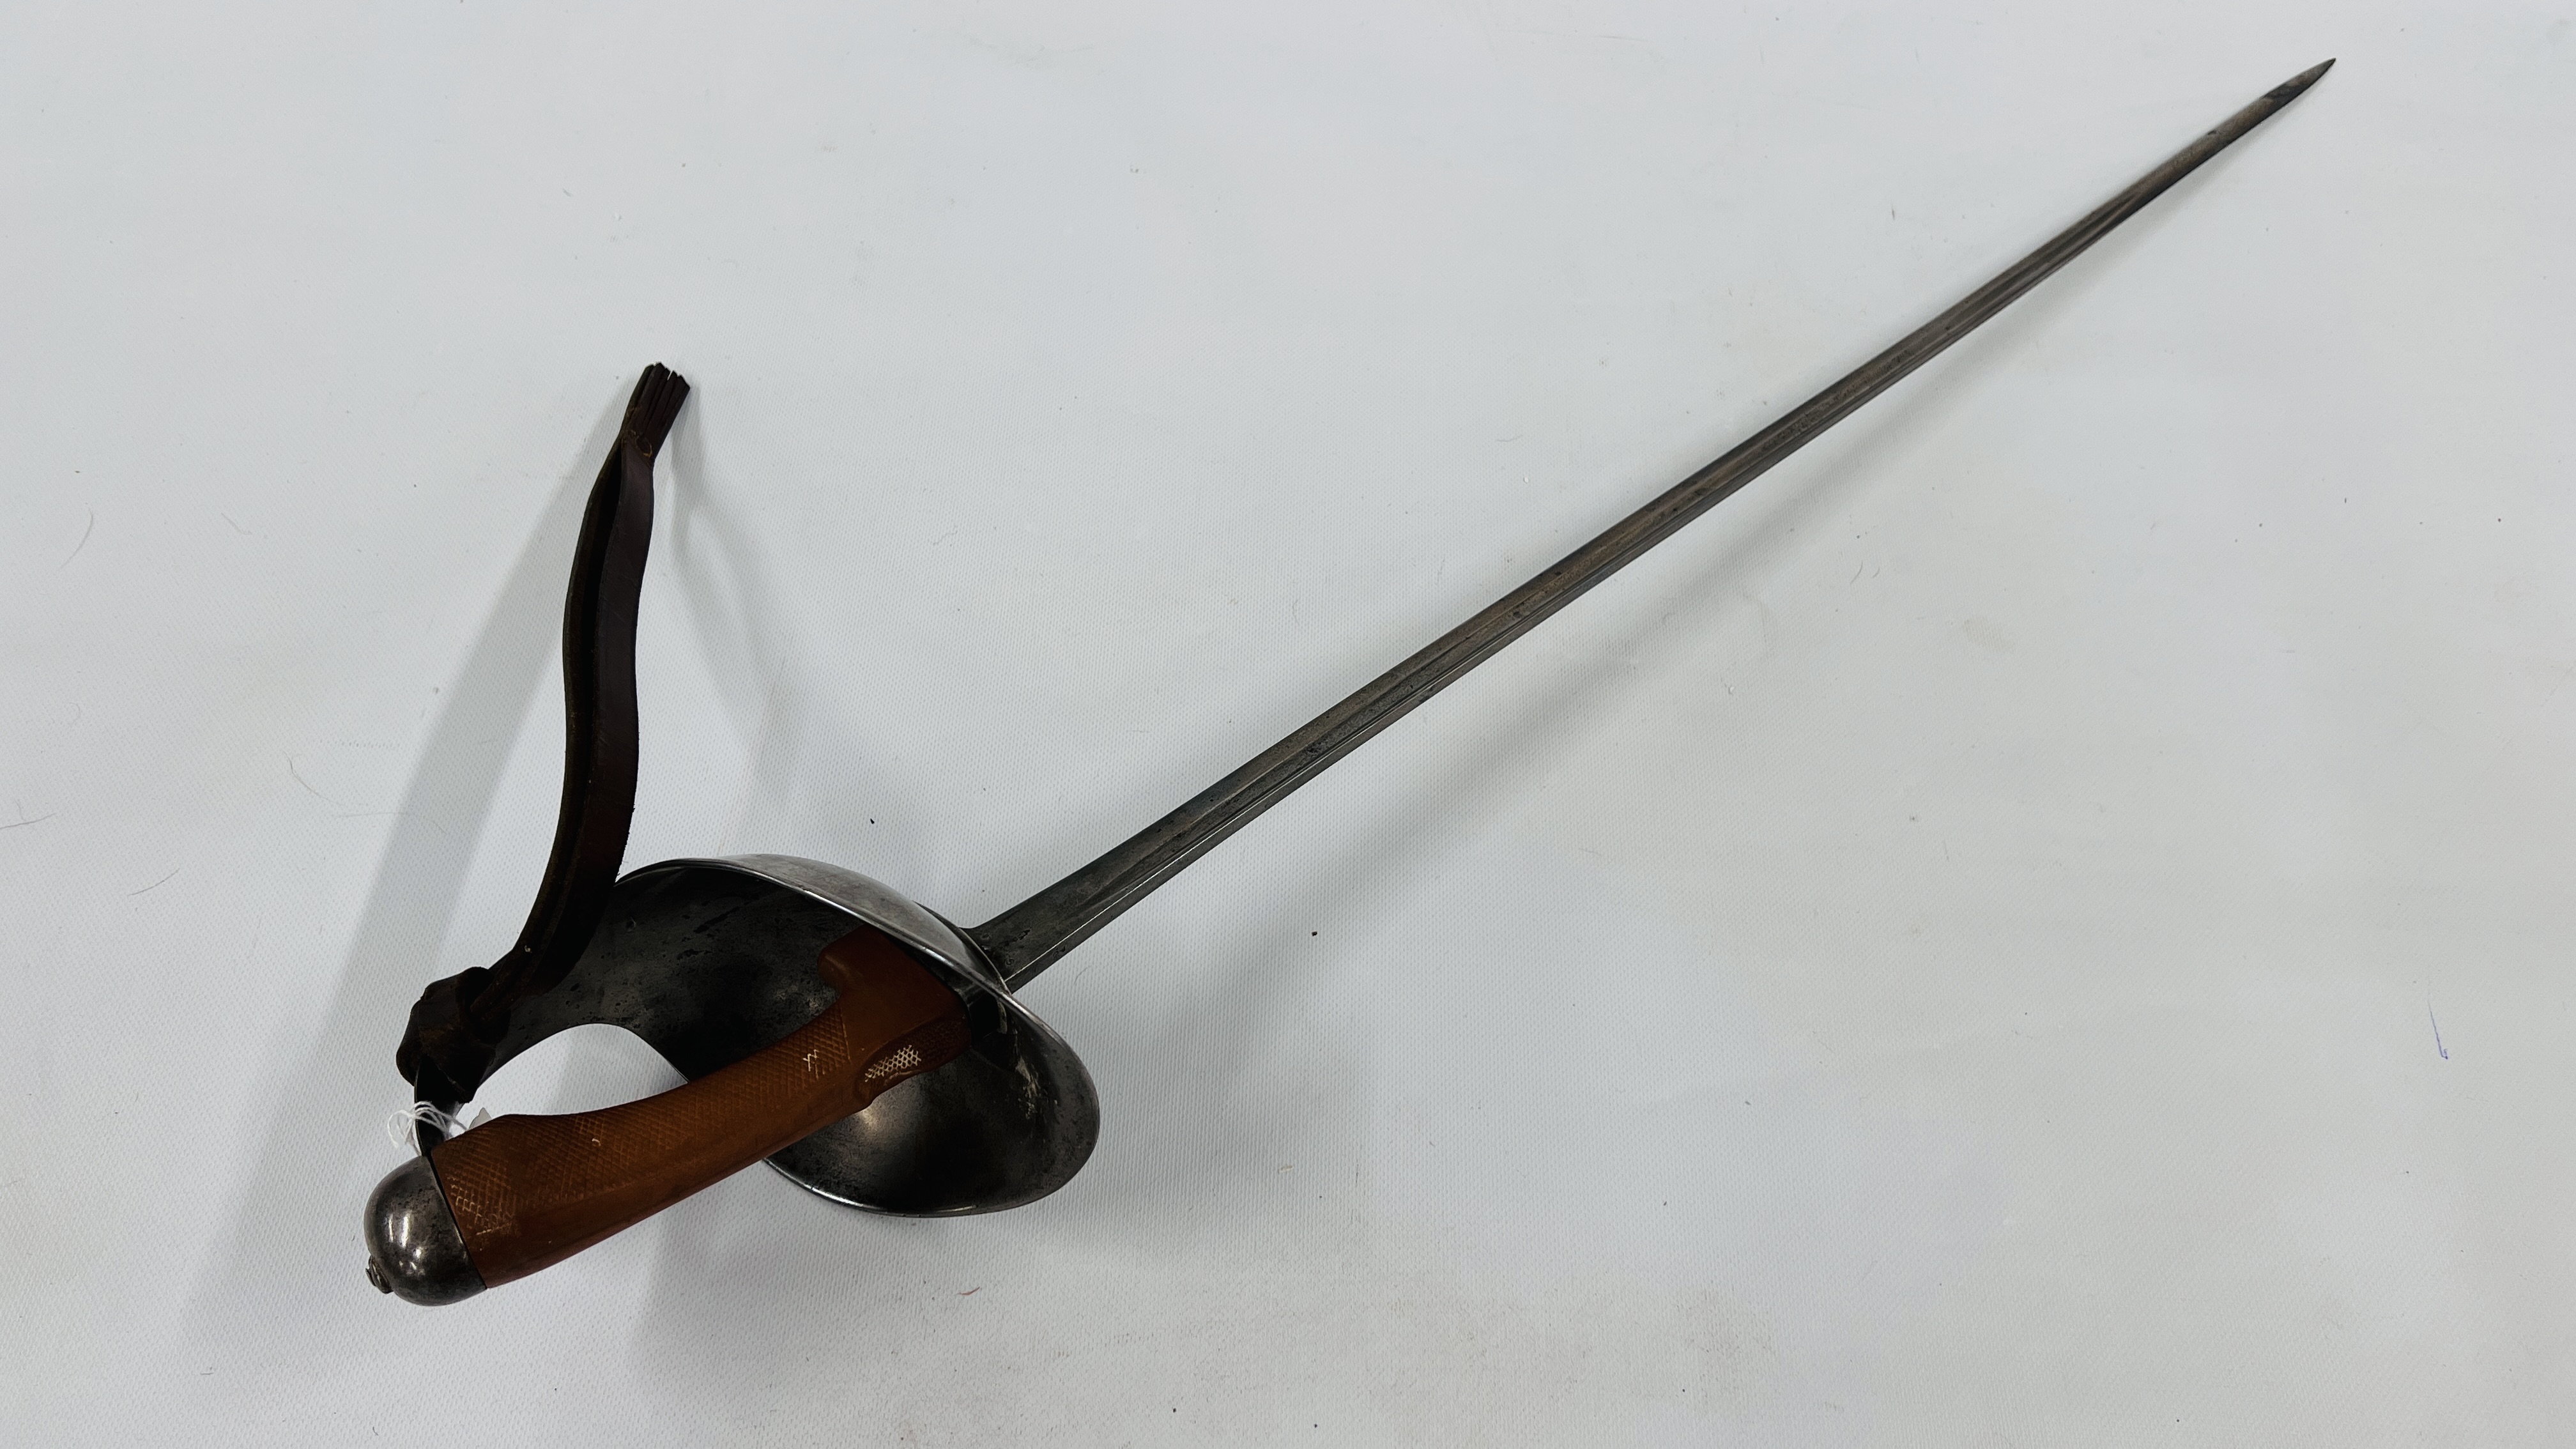 BRITISH 1908 PATTERN CAVALRY TROOPERS SWORD WITH BASKET HILT (NO SCABBARD).